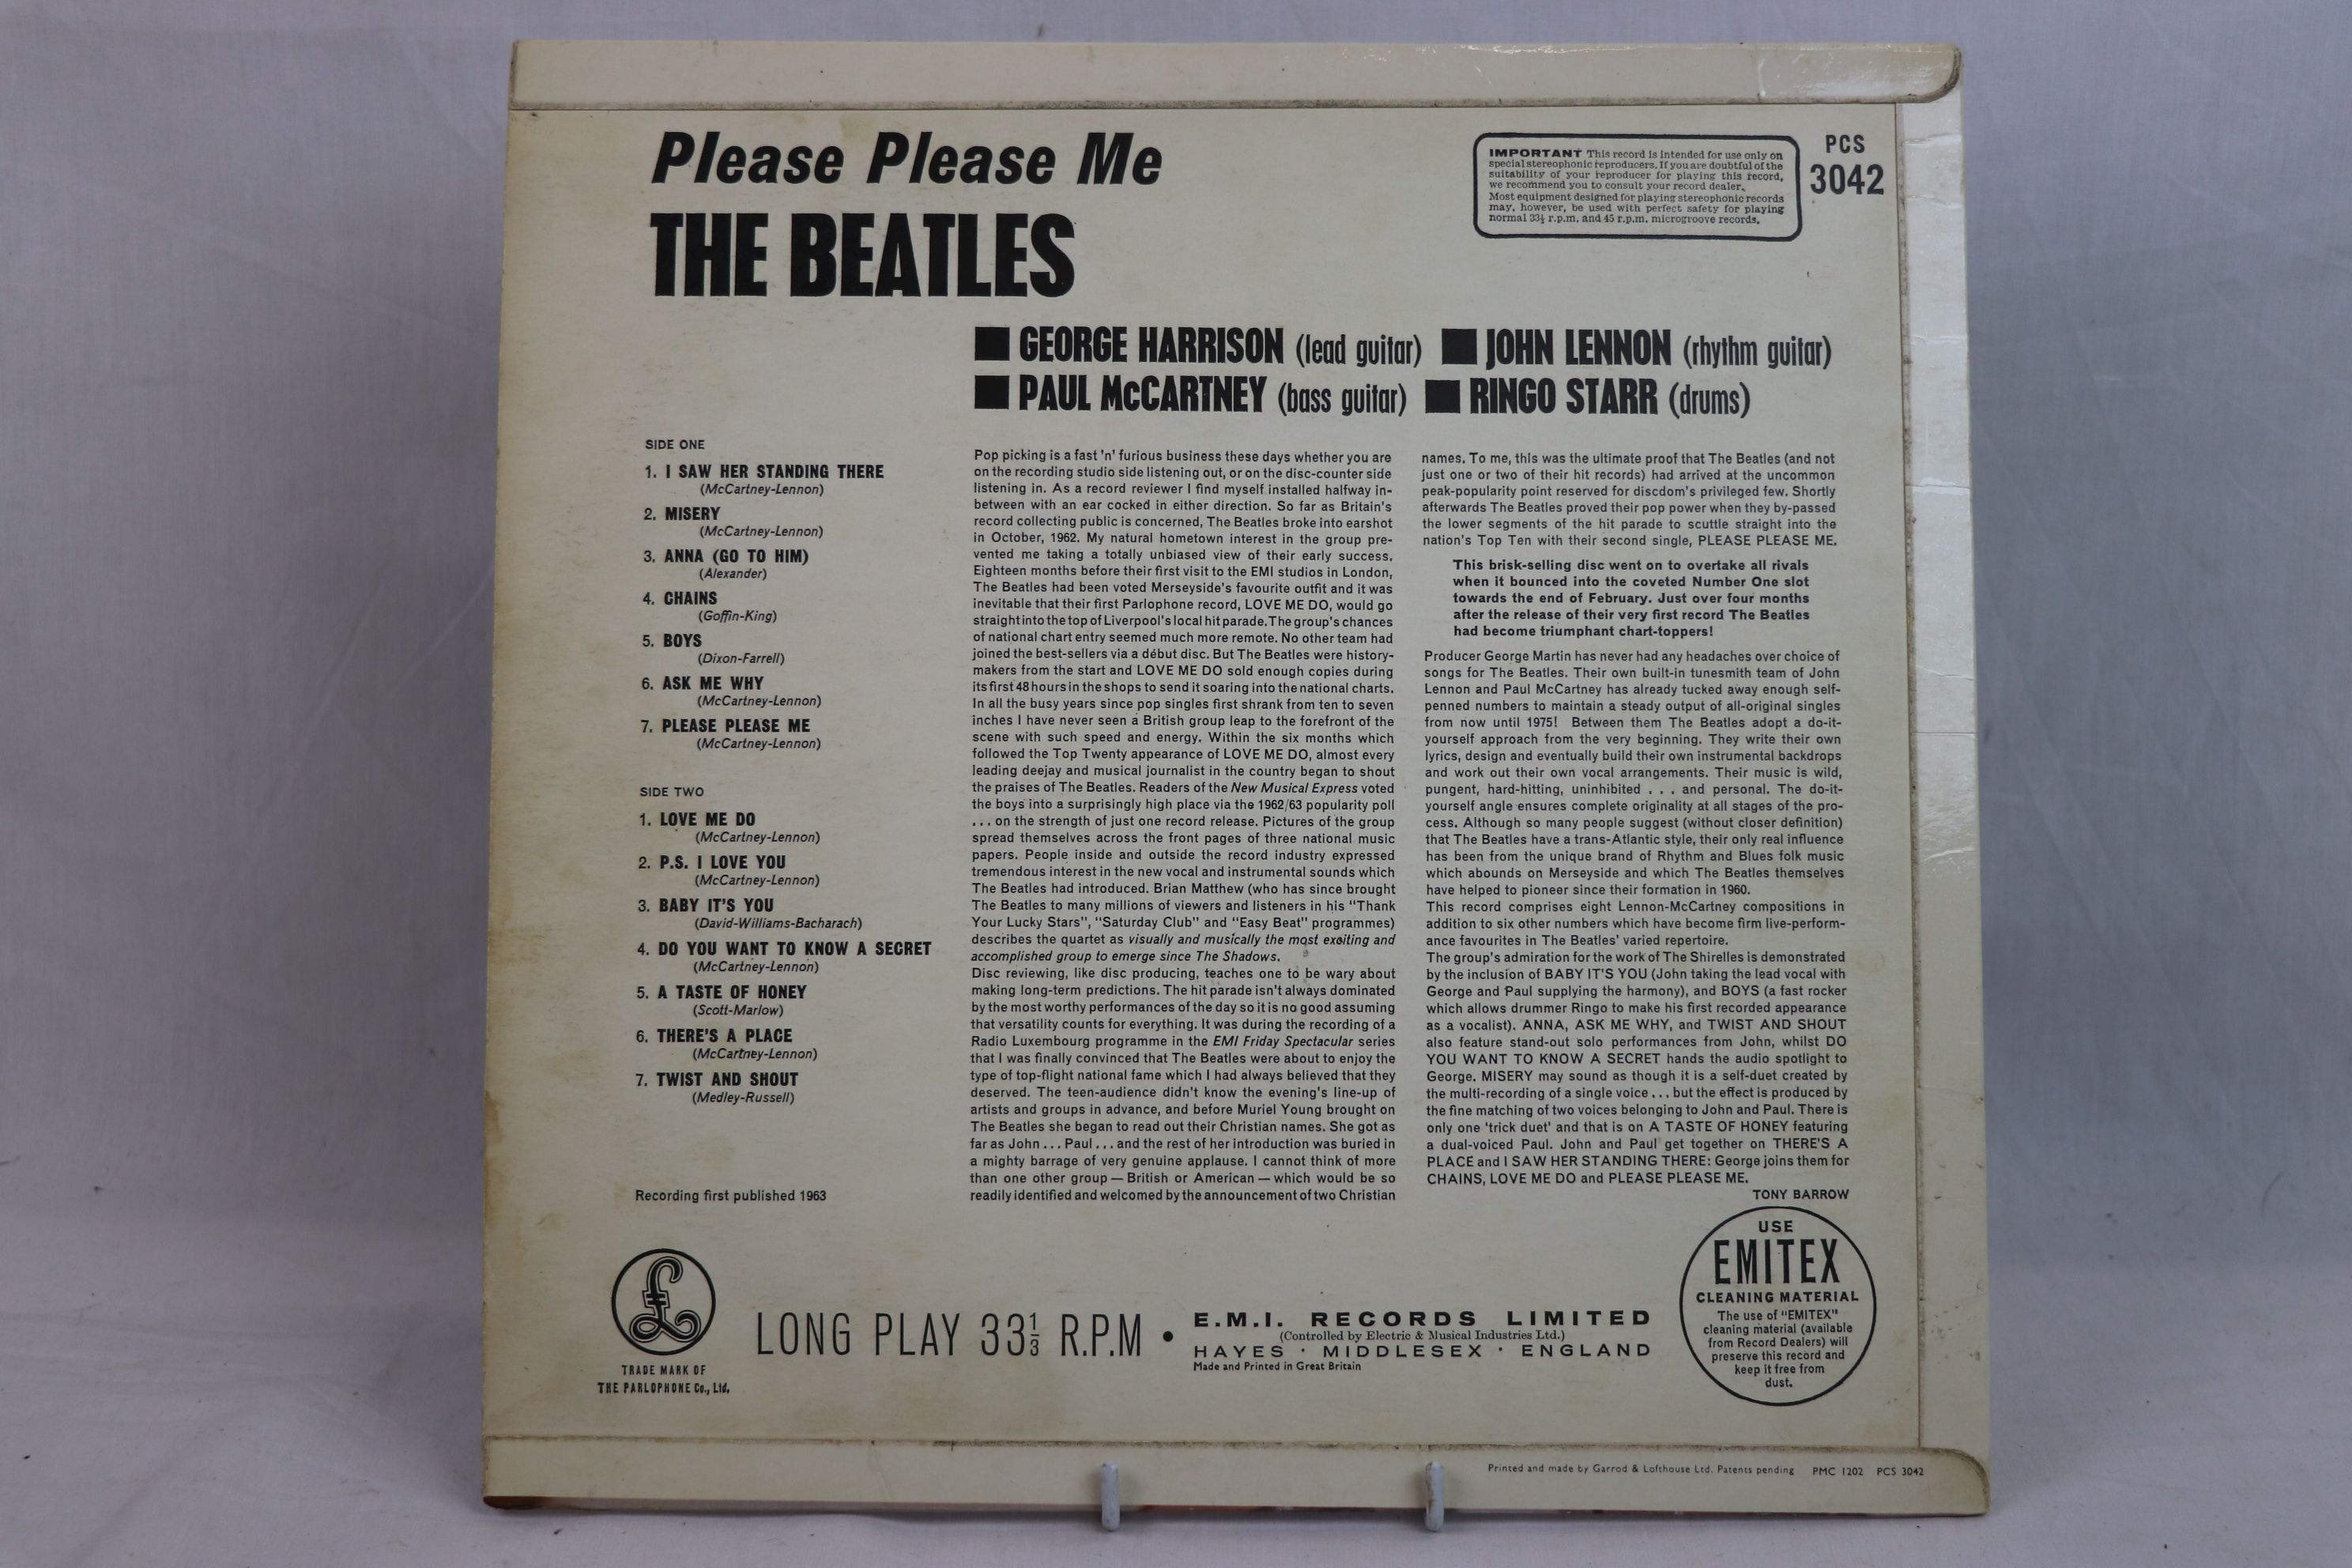 Vinyl - The Beatles Please Please Me PCS3042 yellow and black label, stereo, 33 1/3 rpm to label, - Image 9 of 10